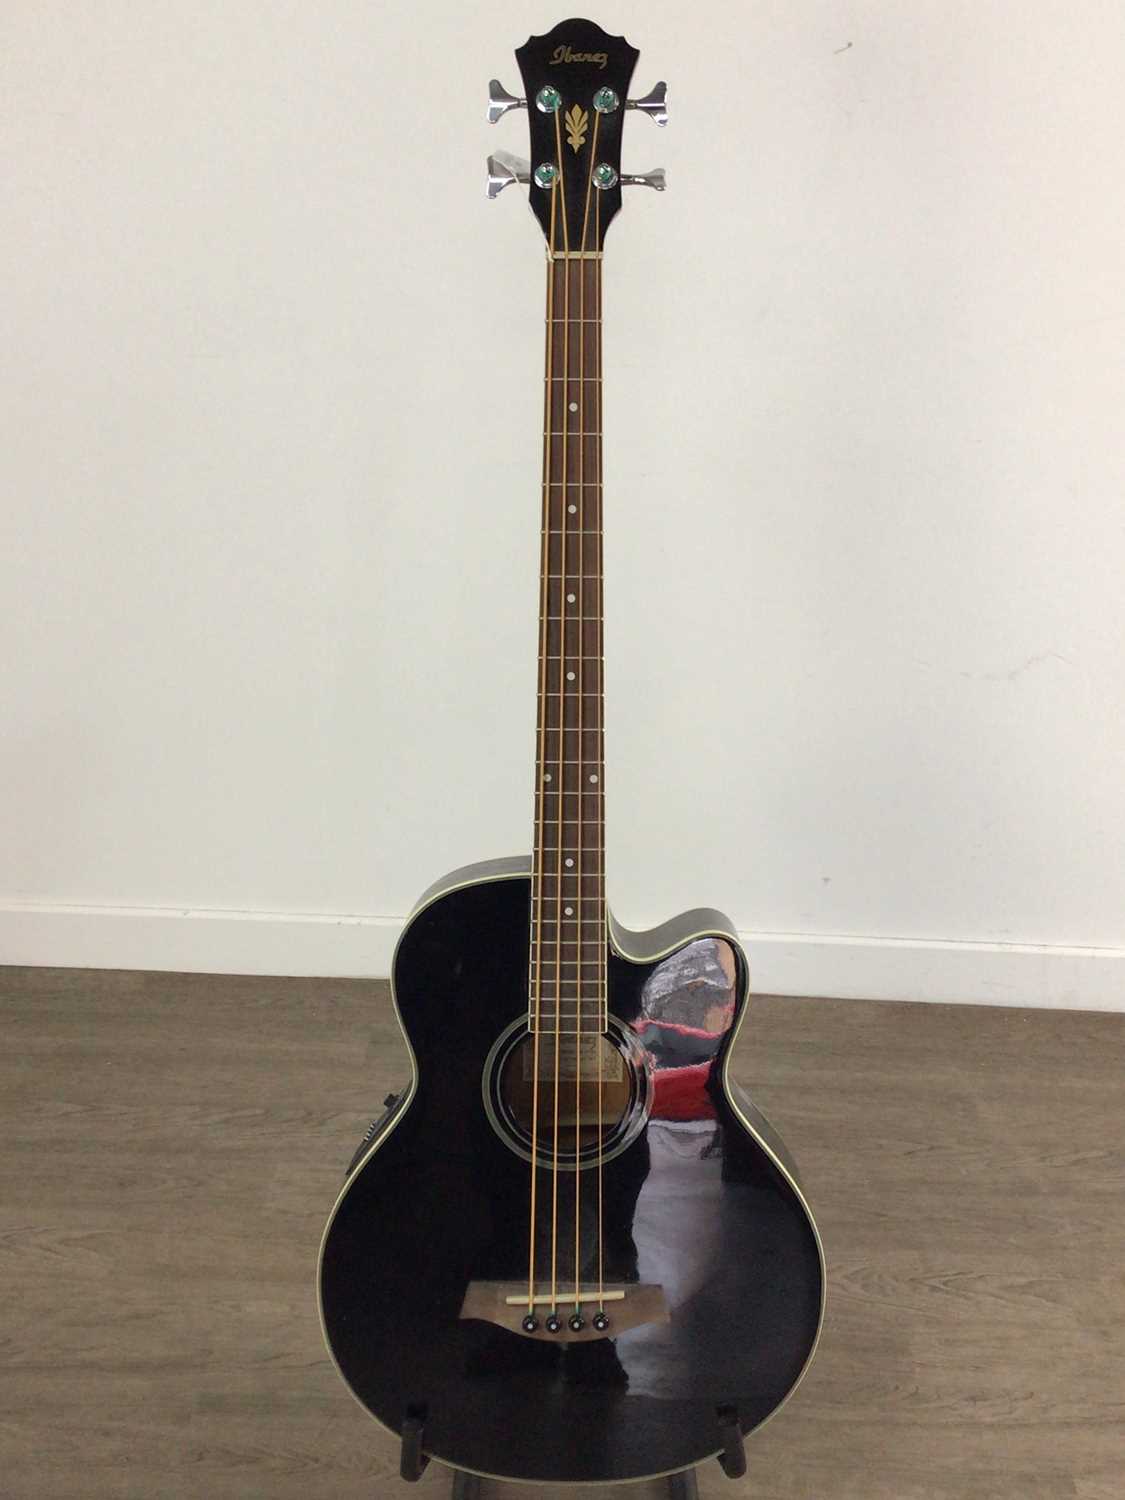 IBANEZ ELECTRO-ACOUSTIC BASS GUITAR - Image 2 of 2